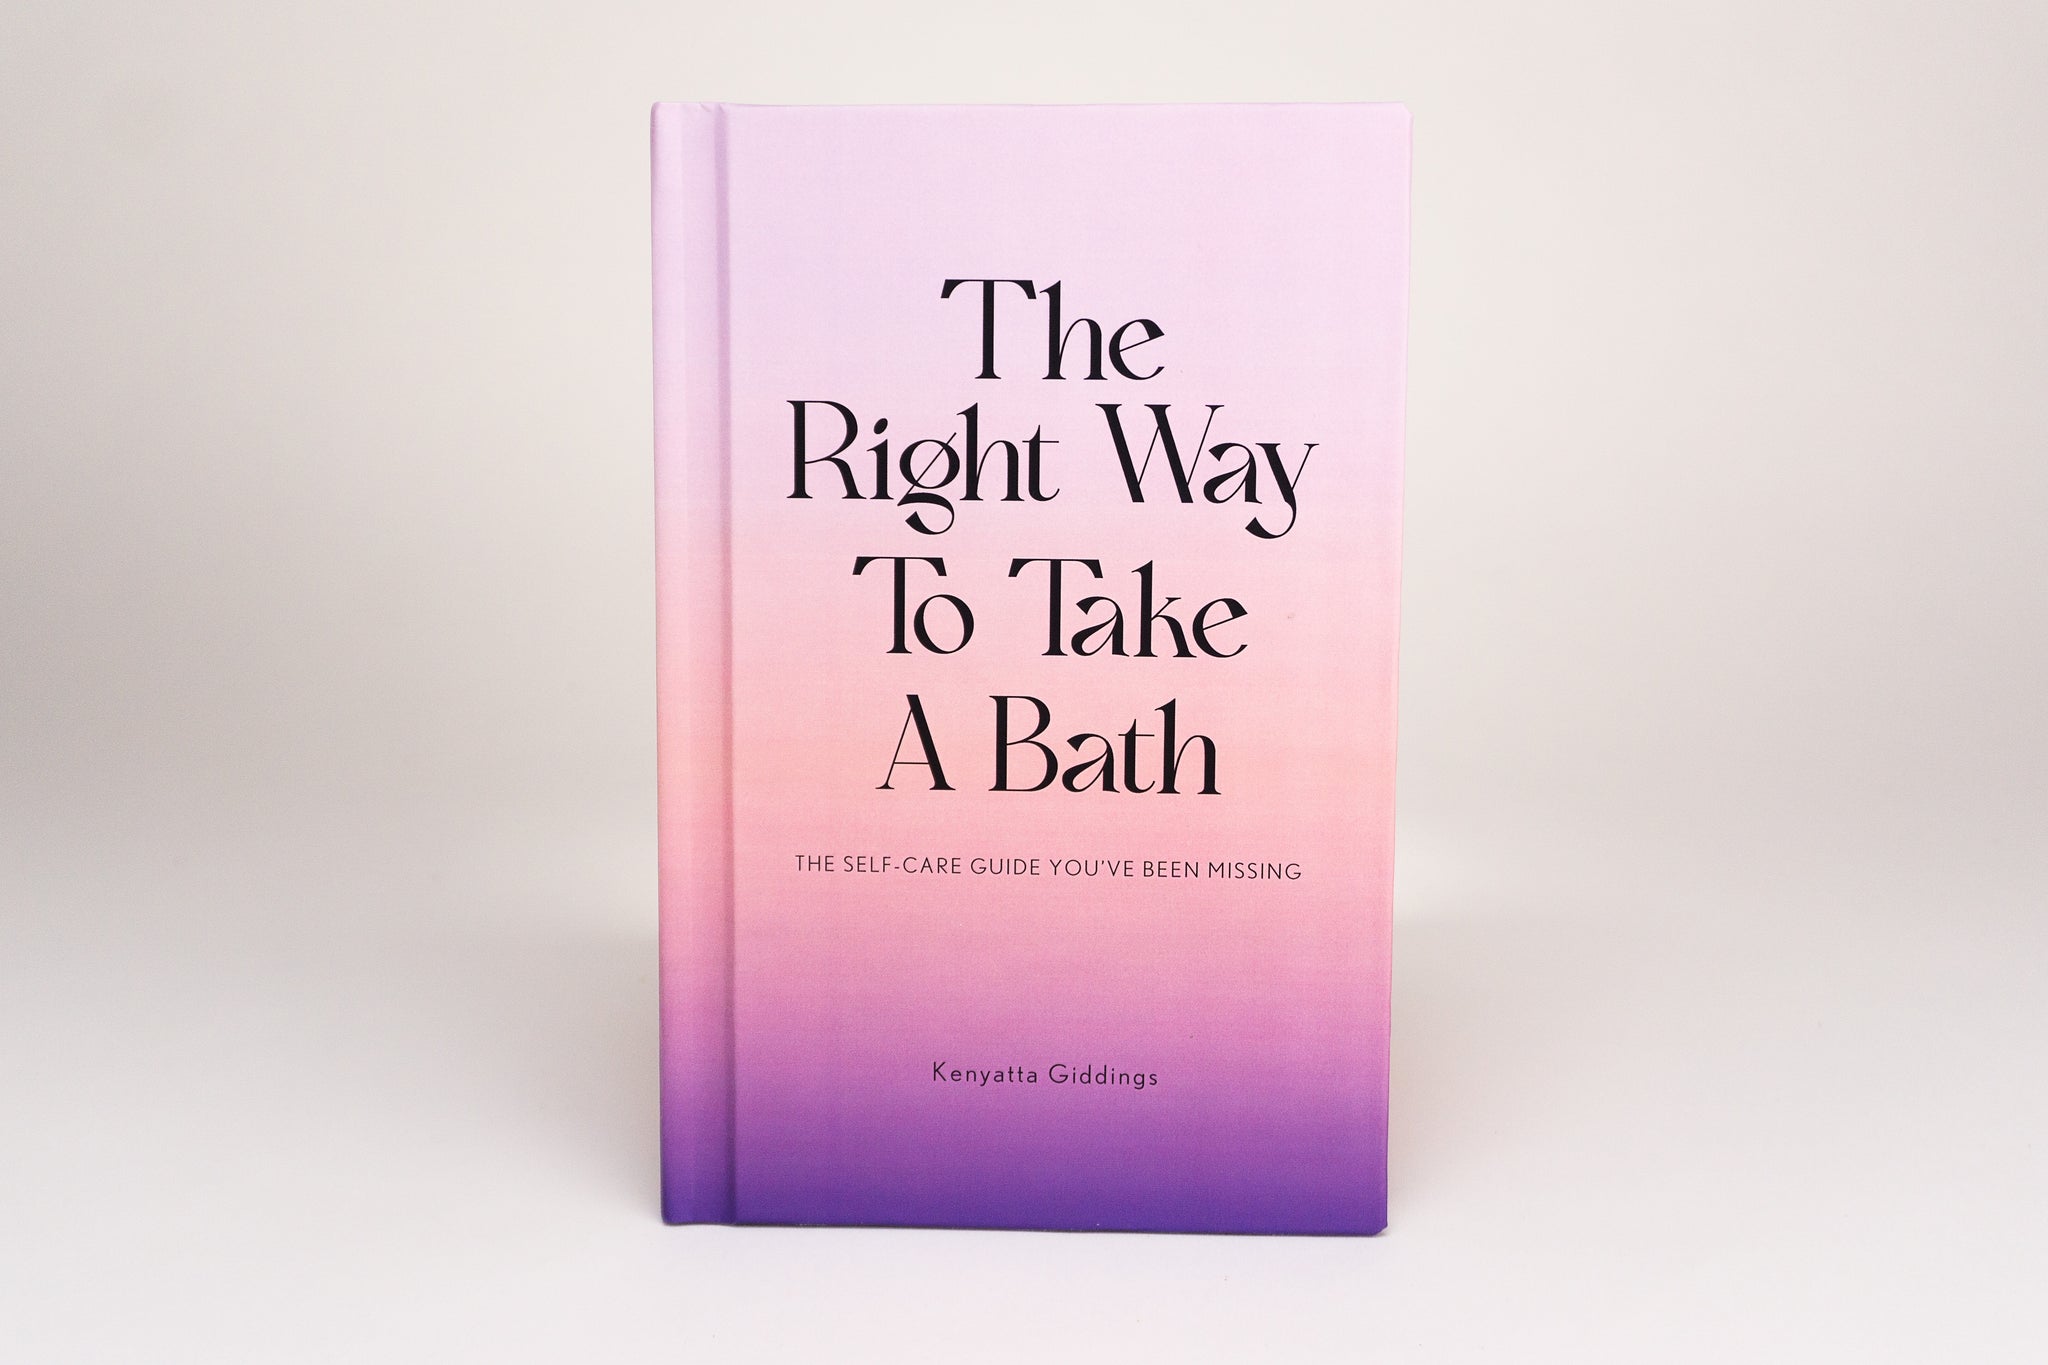 The Right Way To Take A Bath hardcover book with a soft touch matte pastel cover against a white background. The Right Way To Take A Bath is a self-care guide that captures bubble bath tips in a decor-friendly book that makes the perfect spa gift.